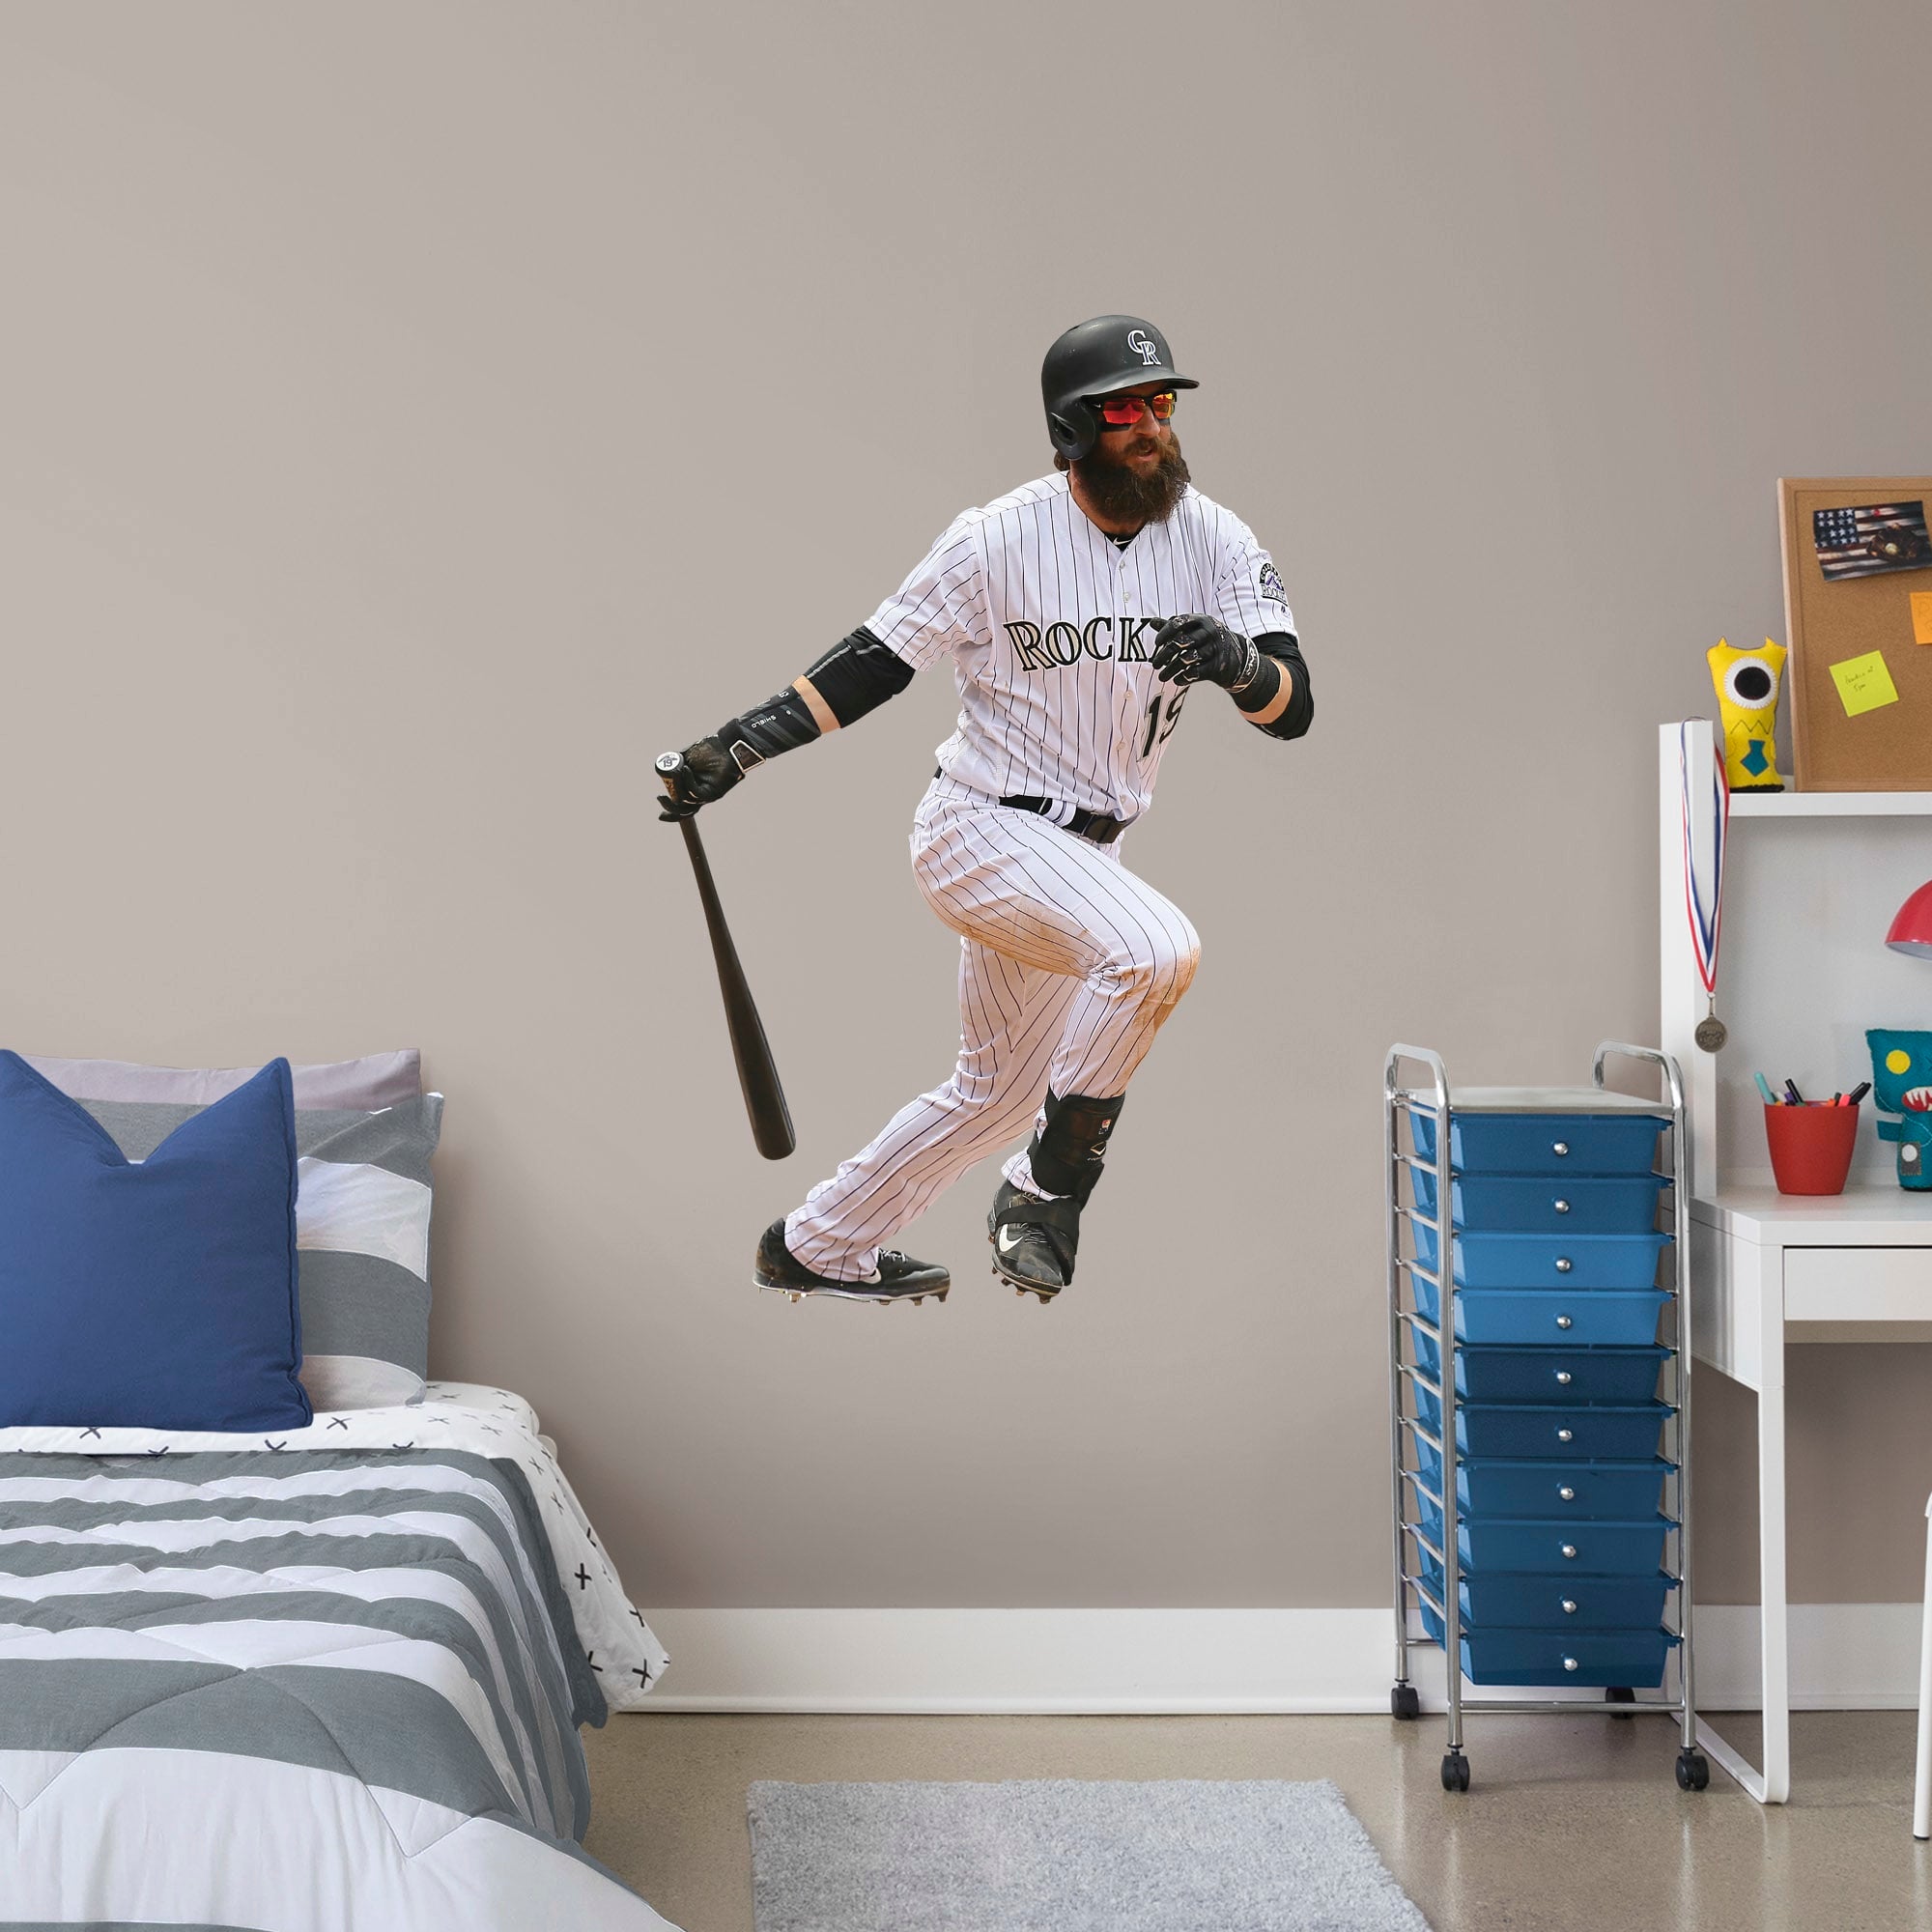 Charlie Blackmon for Colorado Rockies - Officially Licensed MLB Removable Wall Decal Giant Athlete + 2 Decals (34"W x 51"H) by F